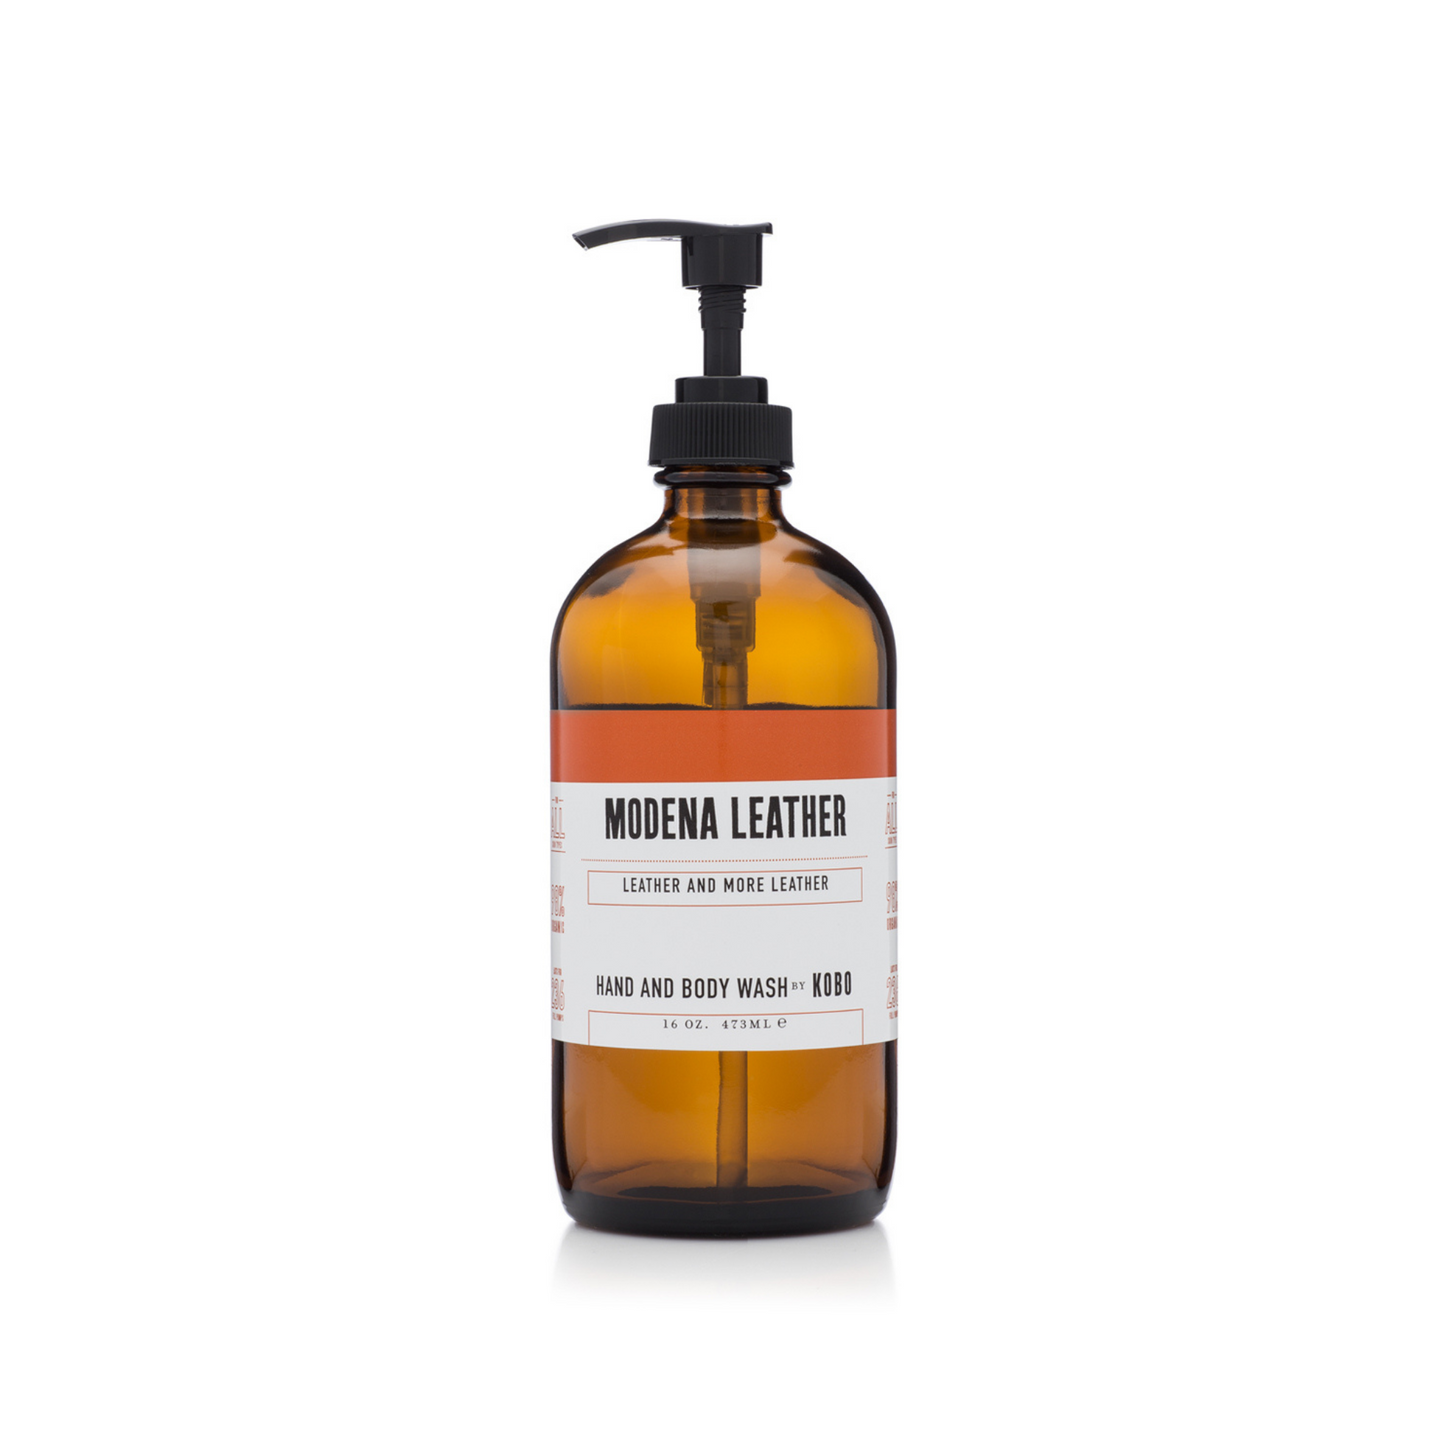 Primary Image of Modena Leather Hand and Body Wash